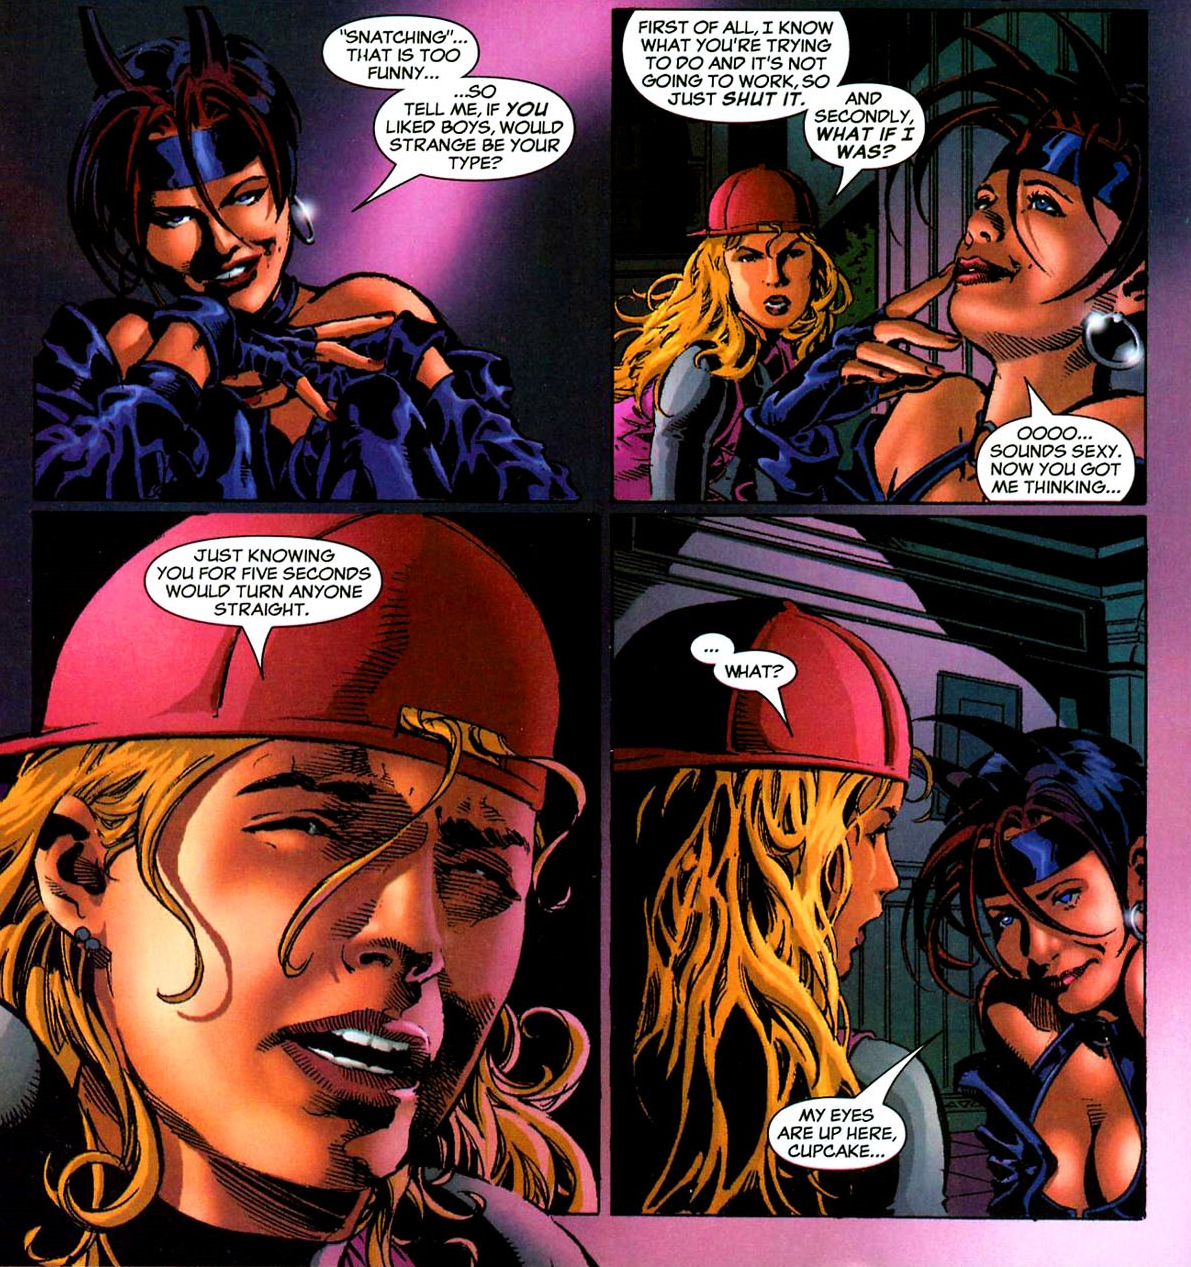 Satana mocks Jennifer Kale's sexuality in Witches Vol. 1 #2 "The Brood' (2004), Marvel Comics. Words by Brian Patrick Walsh, art by Mike Deodato Jr., Michael Kelleher, and Dave Sharpe